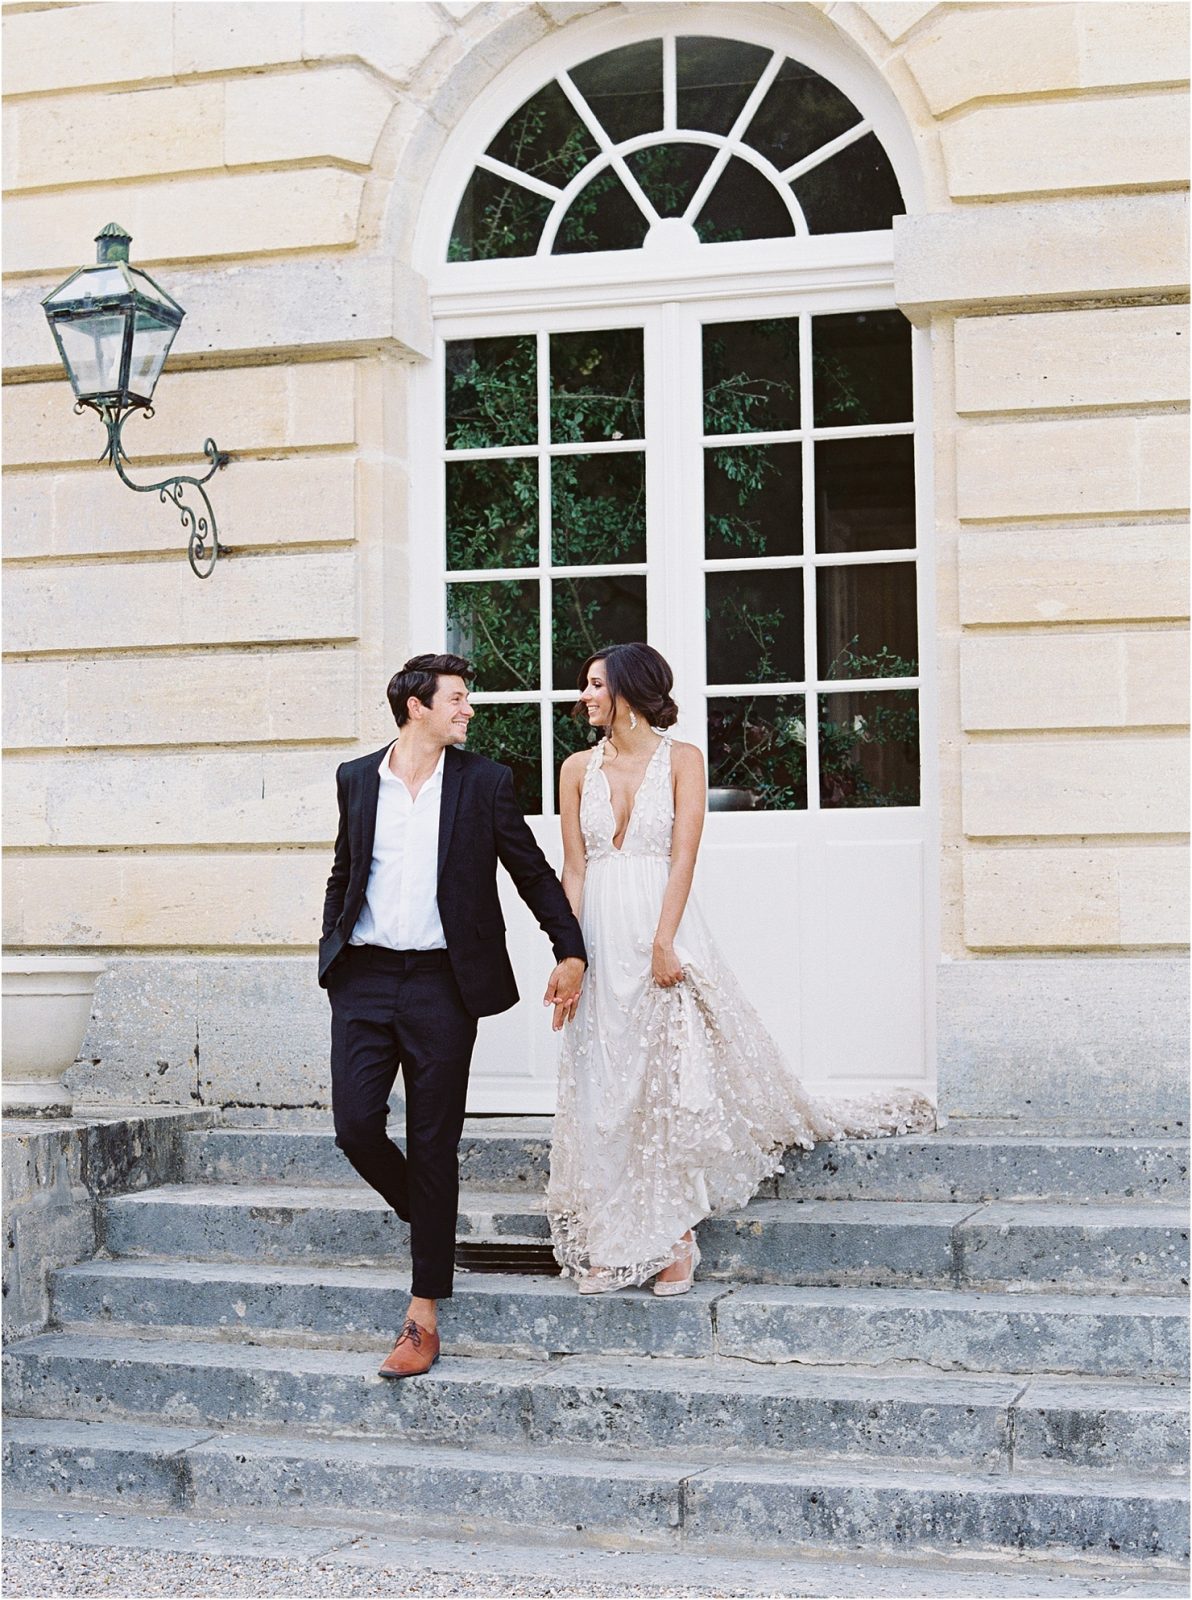 French Chateau Elopement Wedding Photographer| Madeline Trent